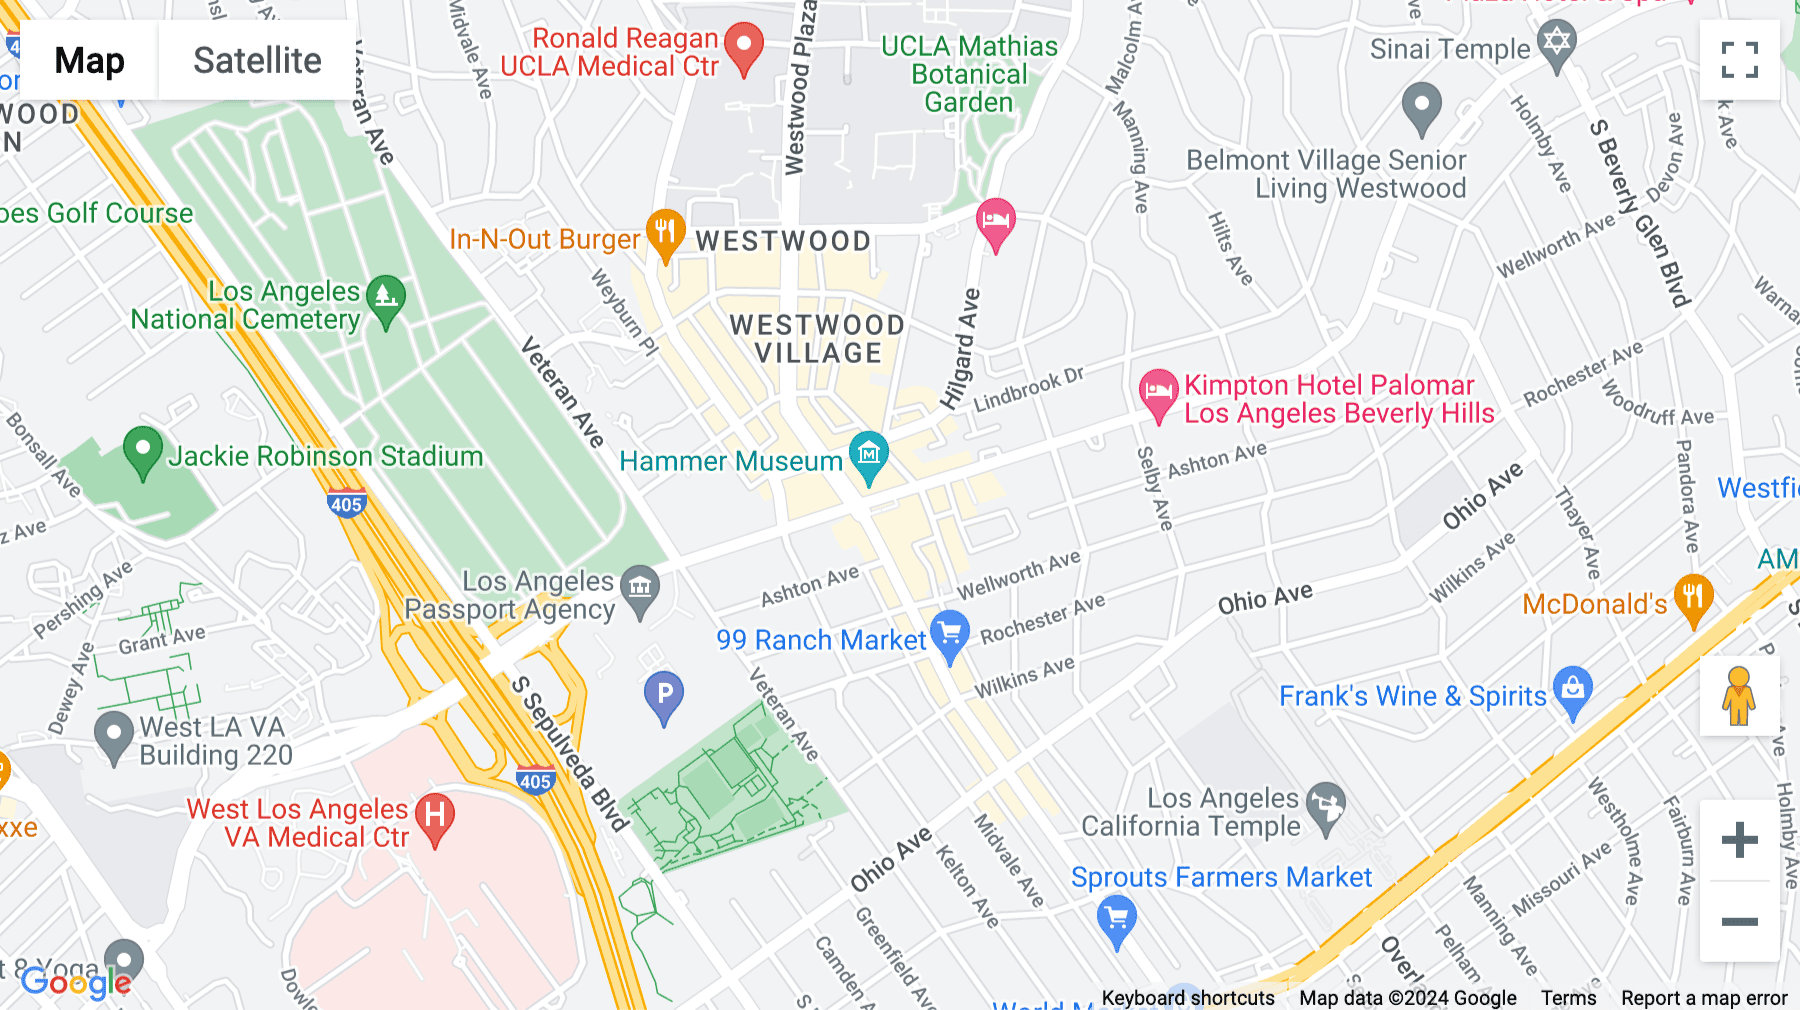 Click for interative map of 10880 Wilshire Blvd, Suite 1101, Oppenheimer Tower Centre, Los Angeles